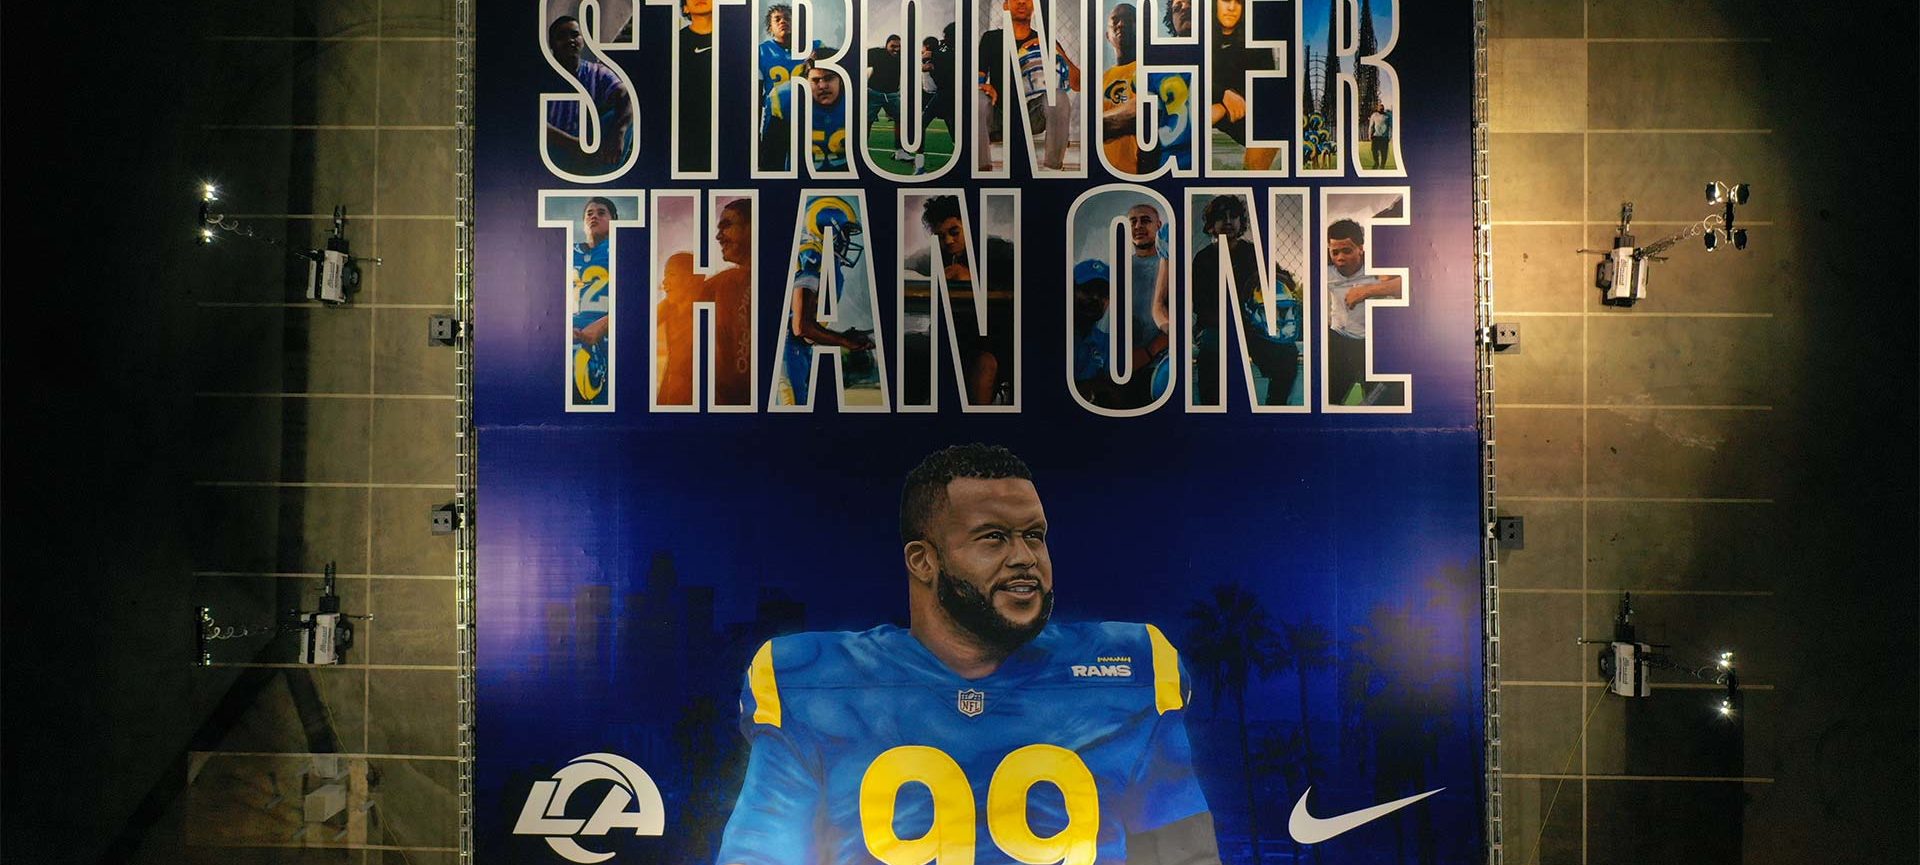 Stronger than one mural with Aaron Donald